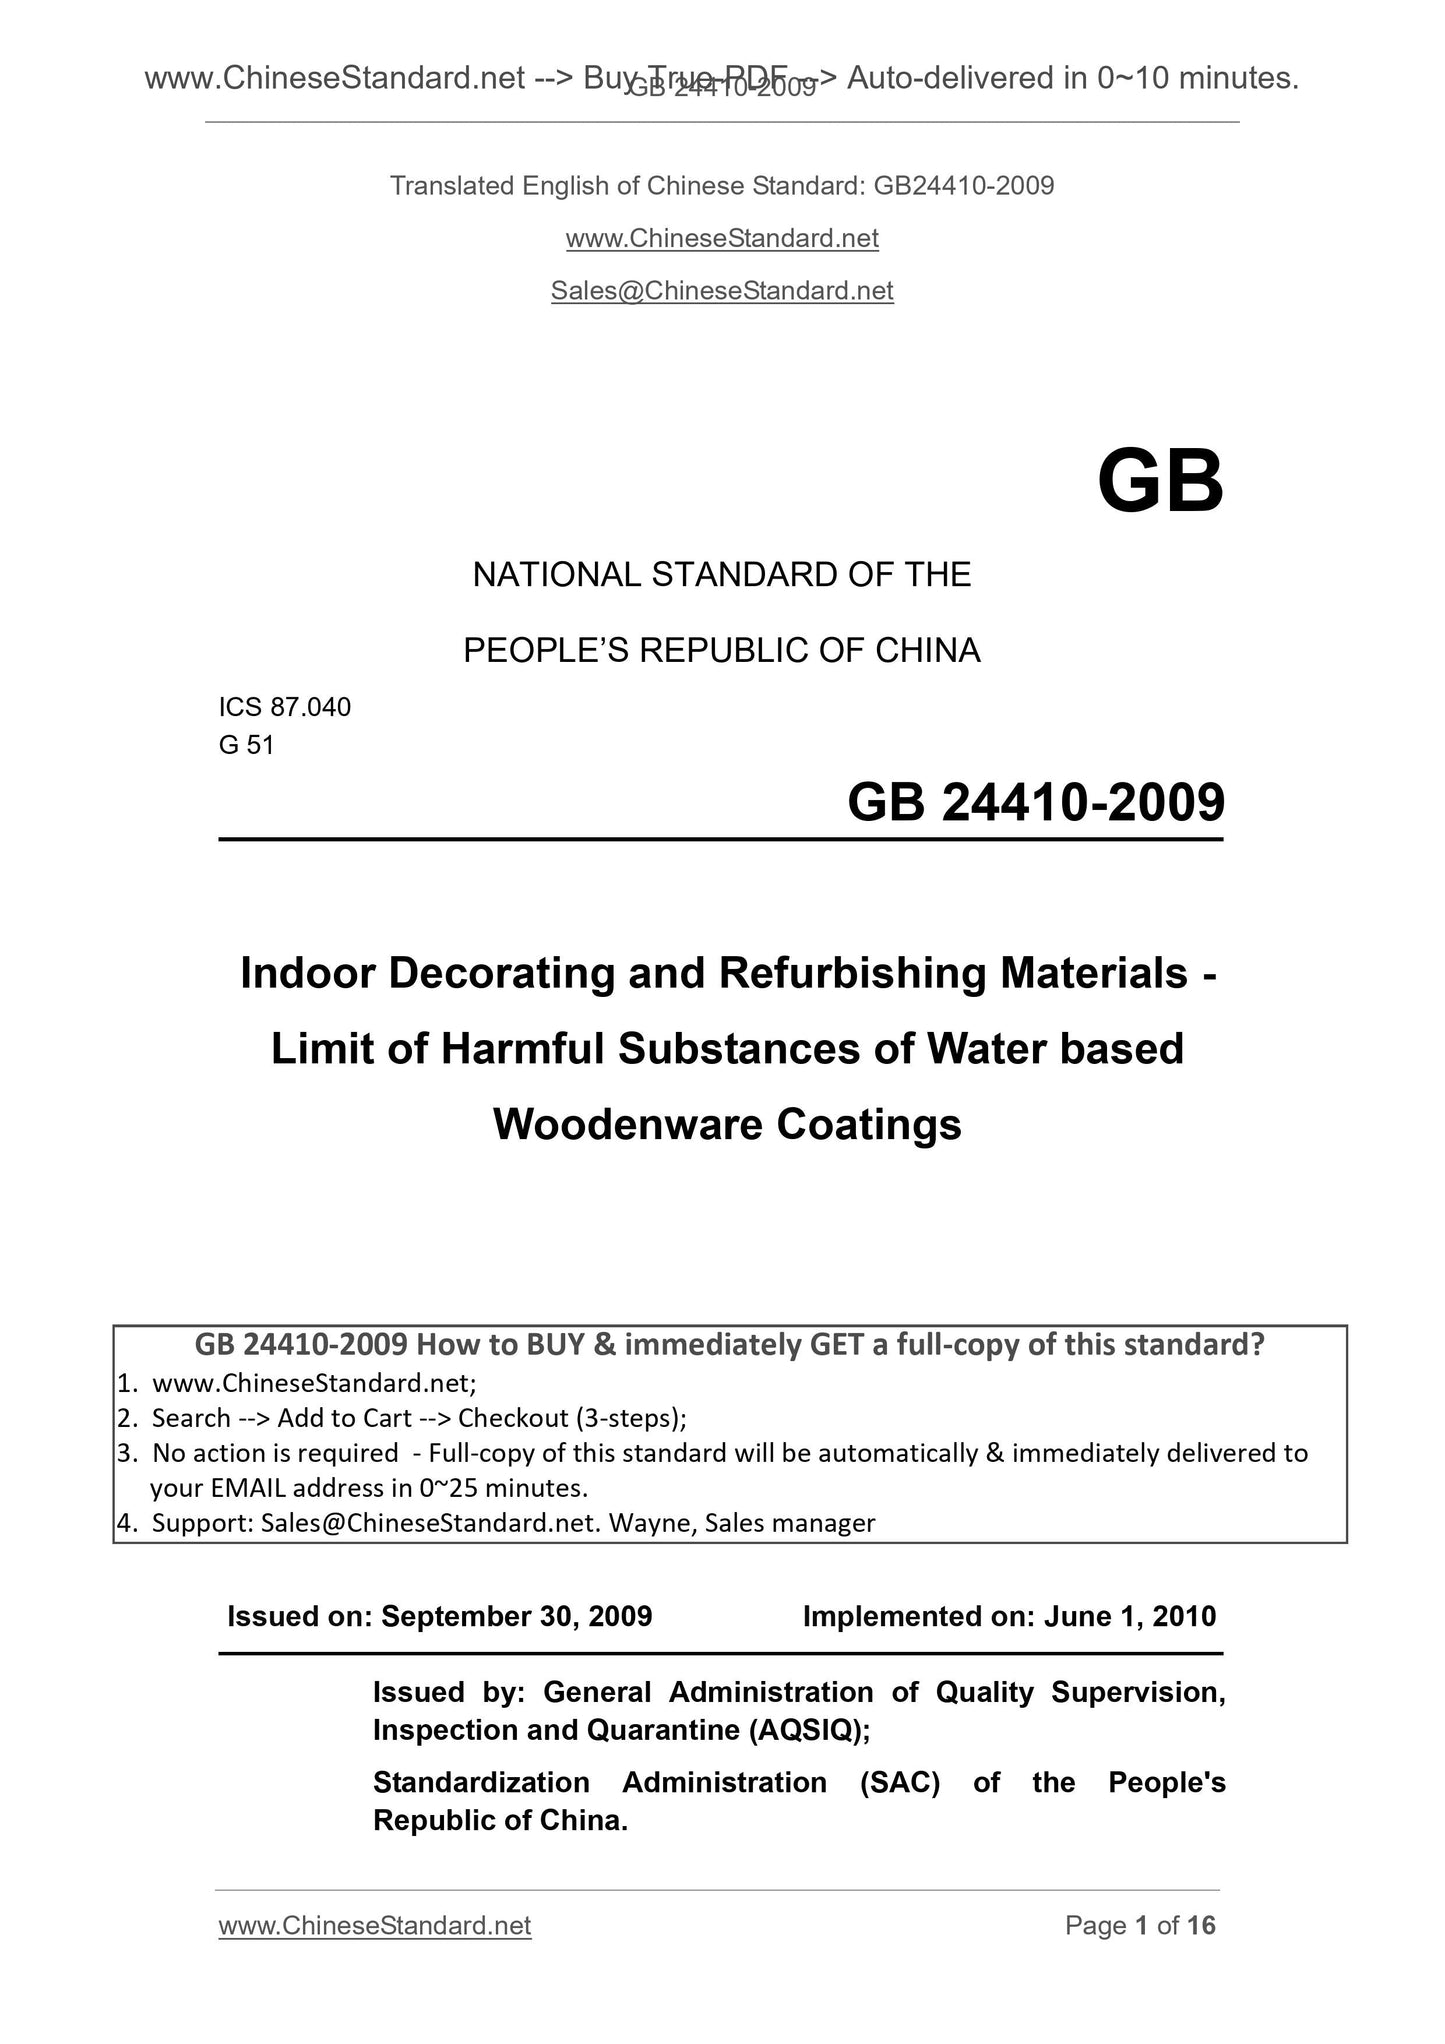 GB 24410-2009 Page 1